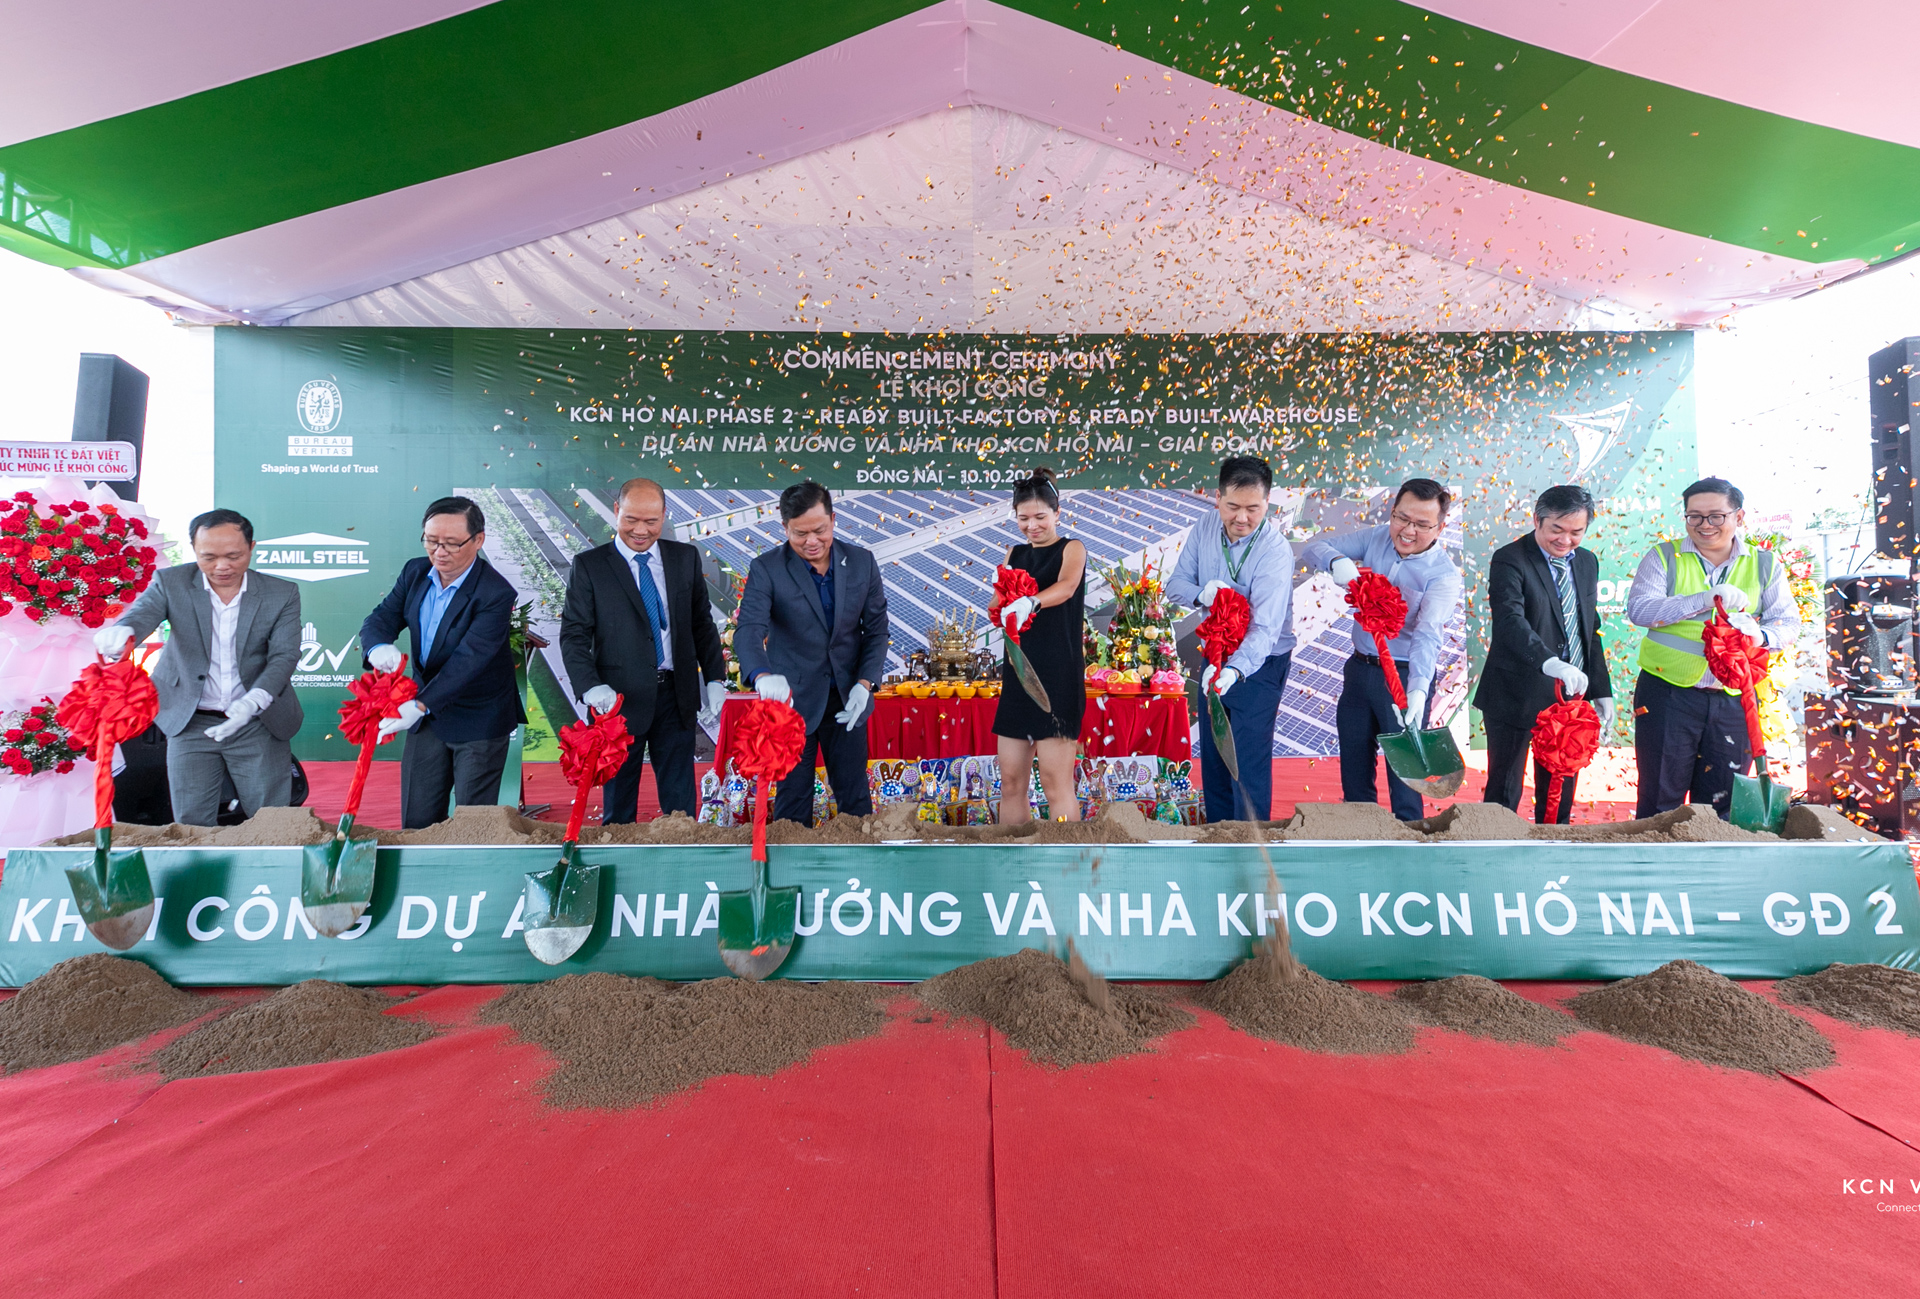 KCN Vietnam celebrates the Commencement Ceremony of KCN Ho Nai – Phase 2 for approximately 50,000 sqm of ready-built facilities in Ho Nai Industrial Park, Dong Nai Province.